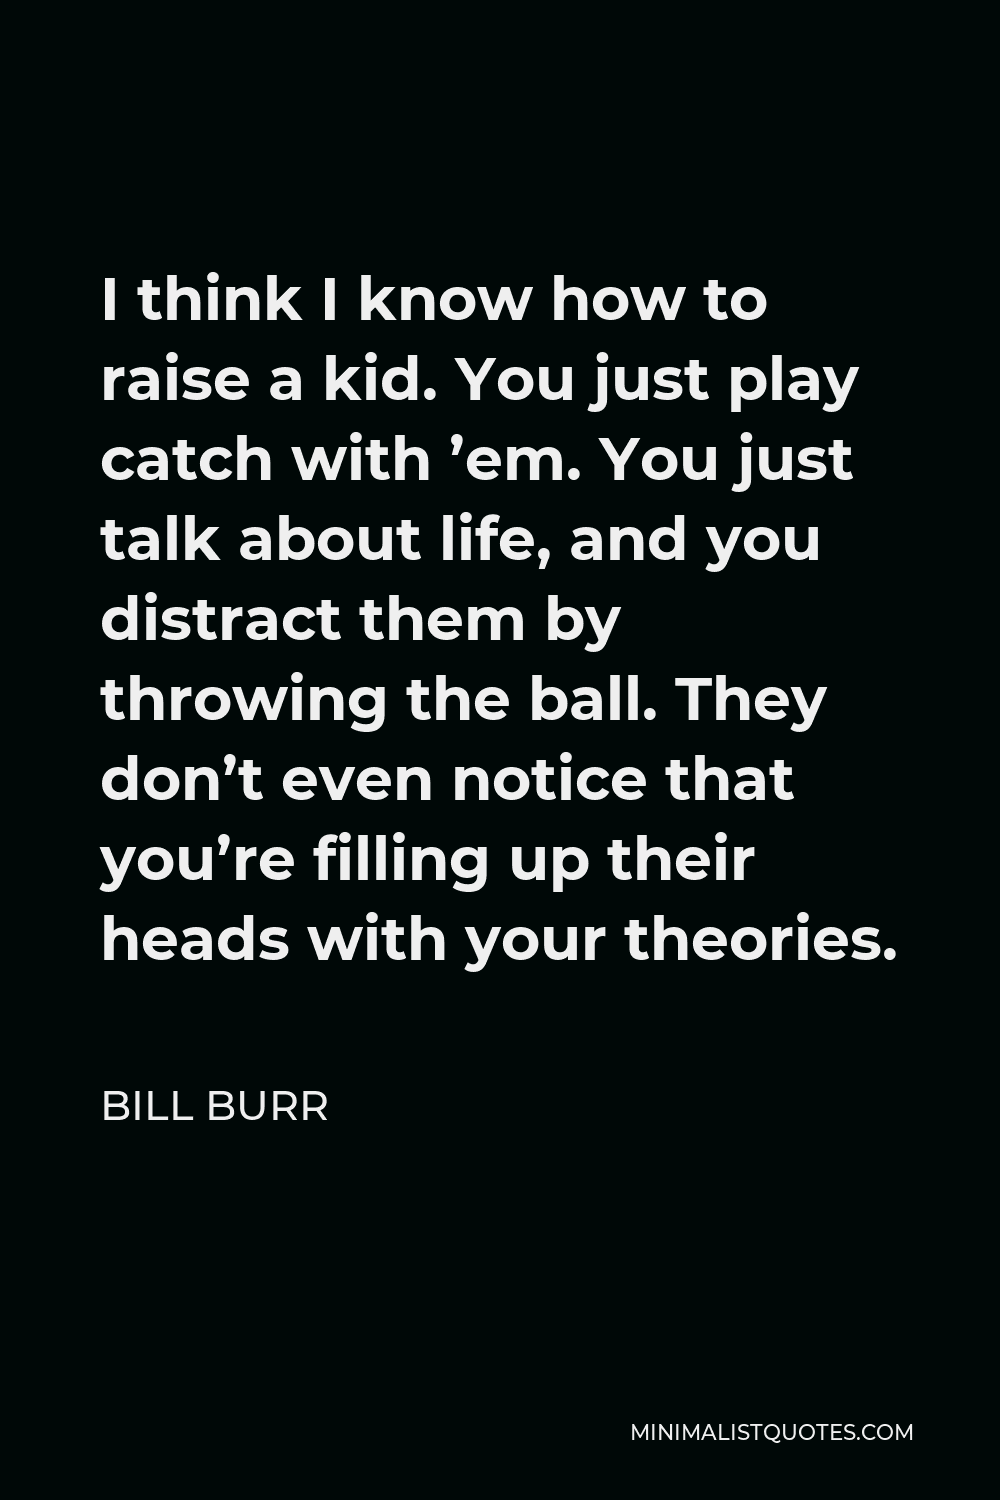 Bill Burr Quote - I think I know how to raise a kid. You just play catch with ’em. You just talk about life, and you distract them by throwing the ball. They don’t even notice that you’re filling up their heads with your theories.